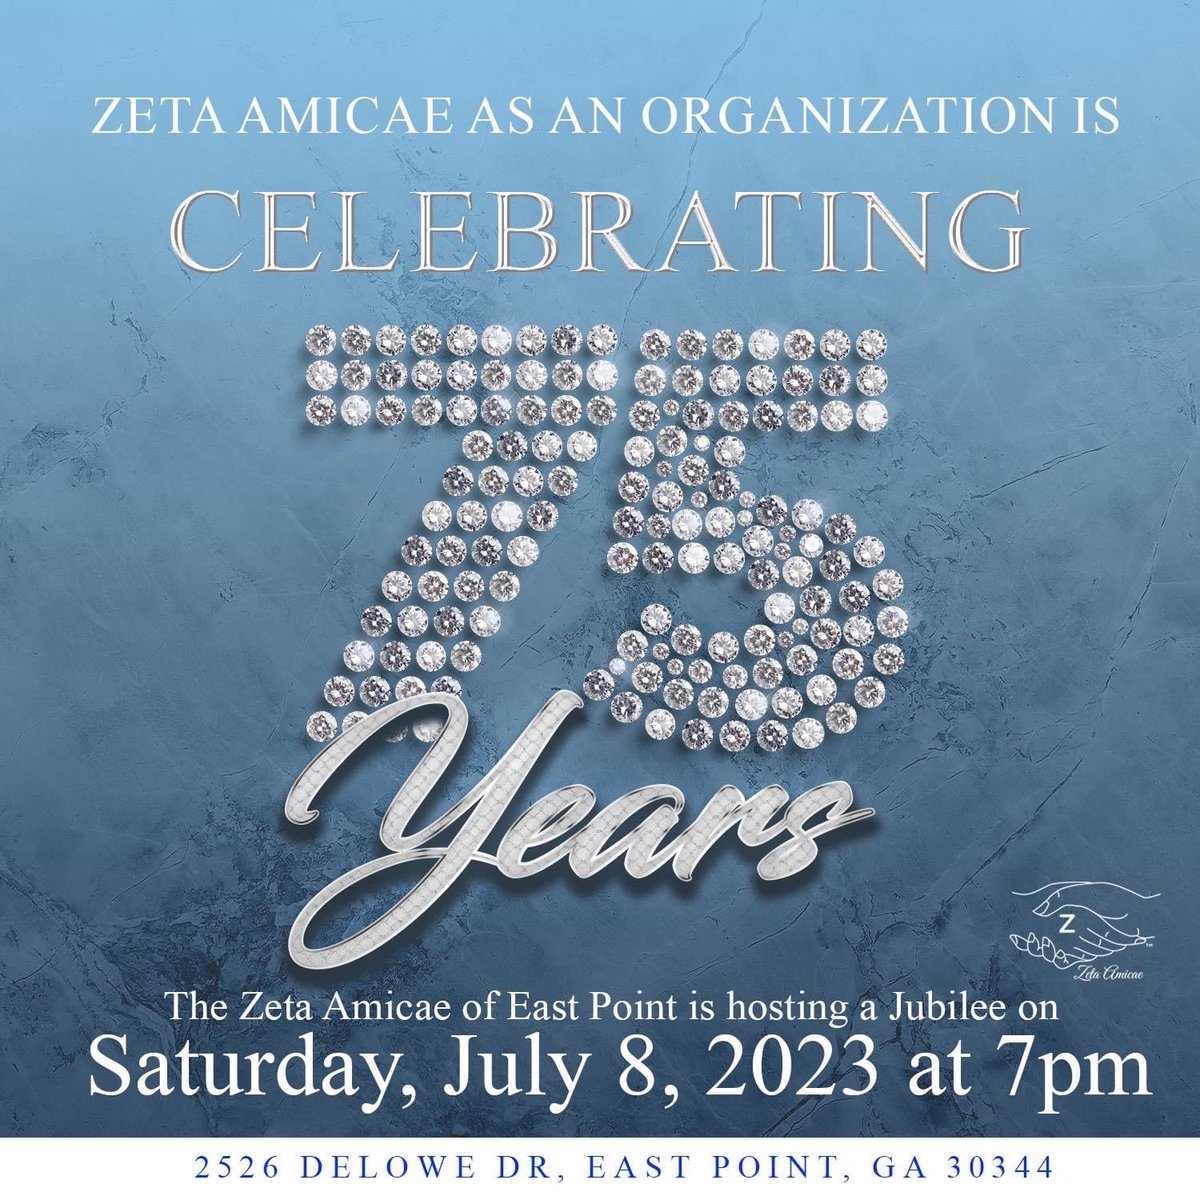 This event is open to the public and we want ALL Zeta Amicae, Zetas, Sigmas, family & friends to come out and celebrate with us.  
 
DJ: Lee’s Lounge  

July 8, 2023 at 7pm. 
Cost: $45 
 
Link to purchase tickets:  

bit.ly/eastpoint_amic… 

#AmicaeEastPoint